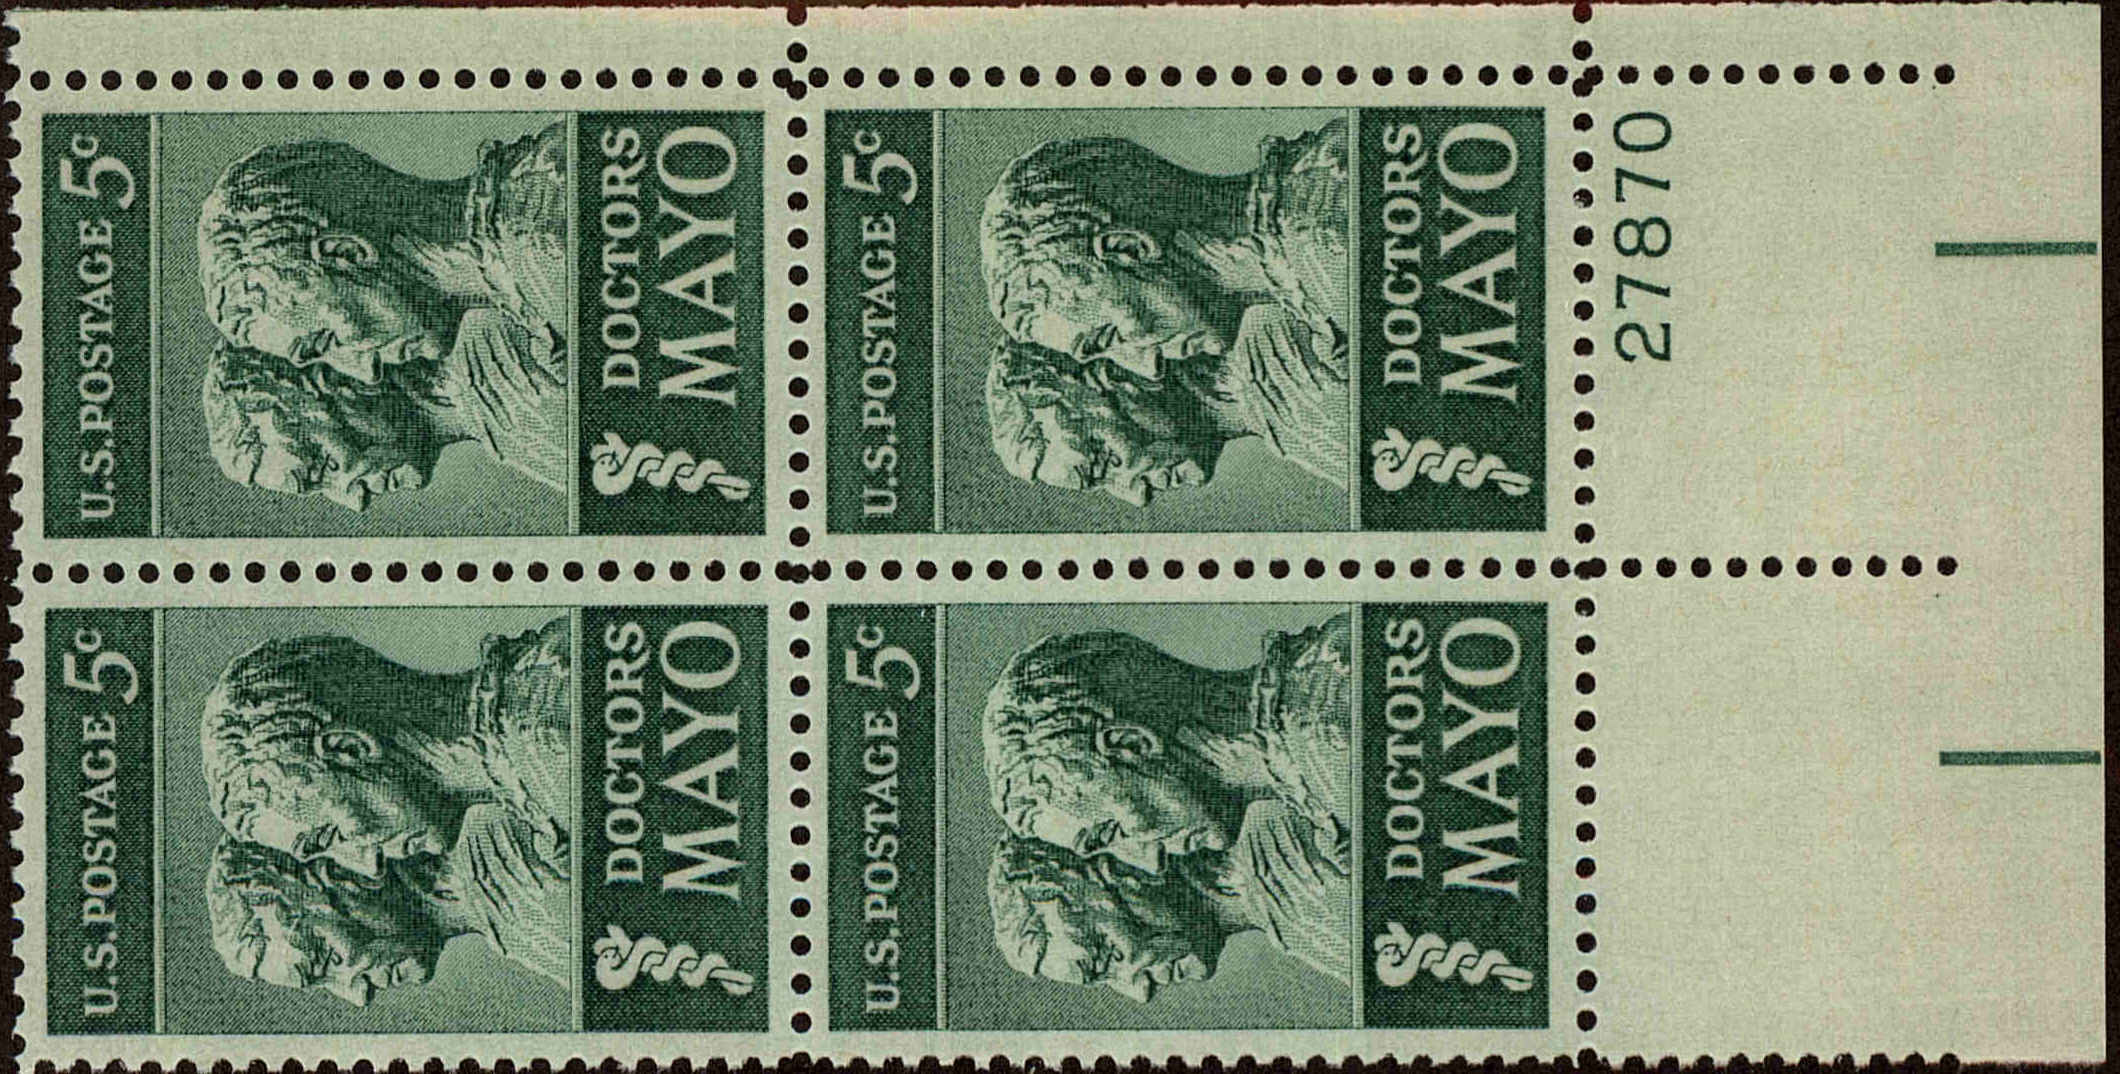 Front view of United States 1251 collectors stamp